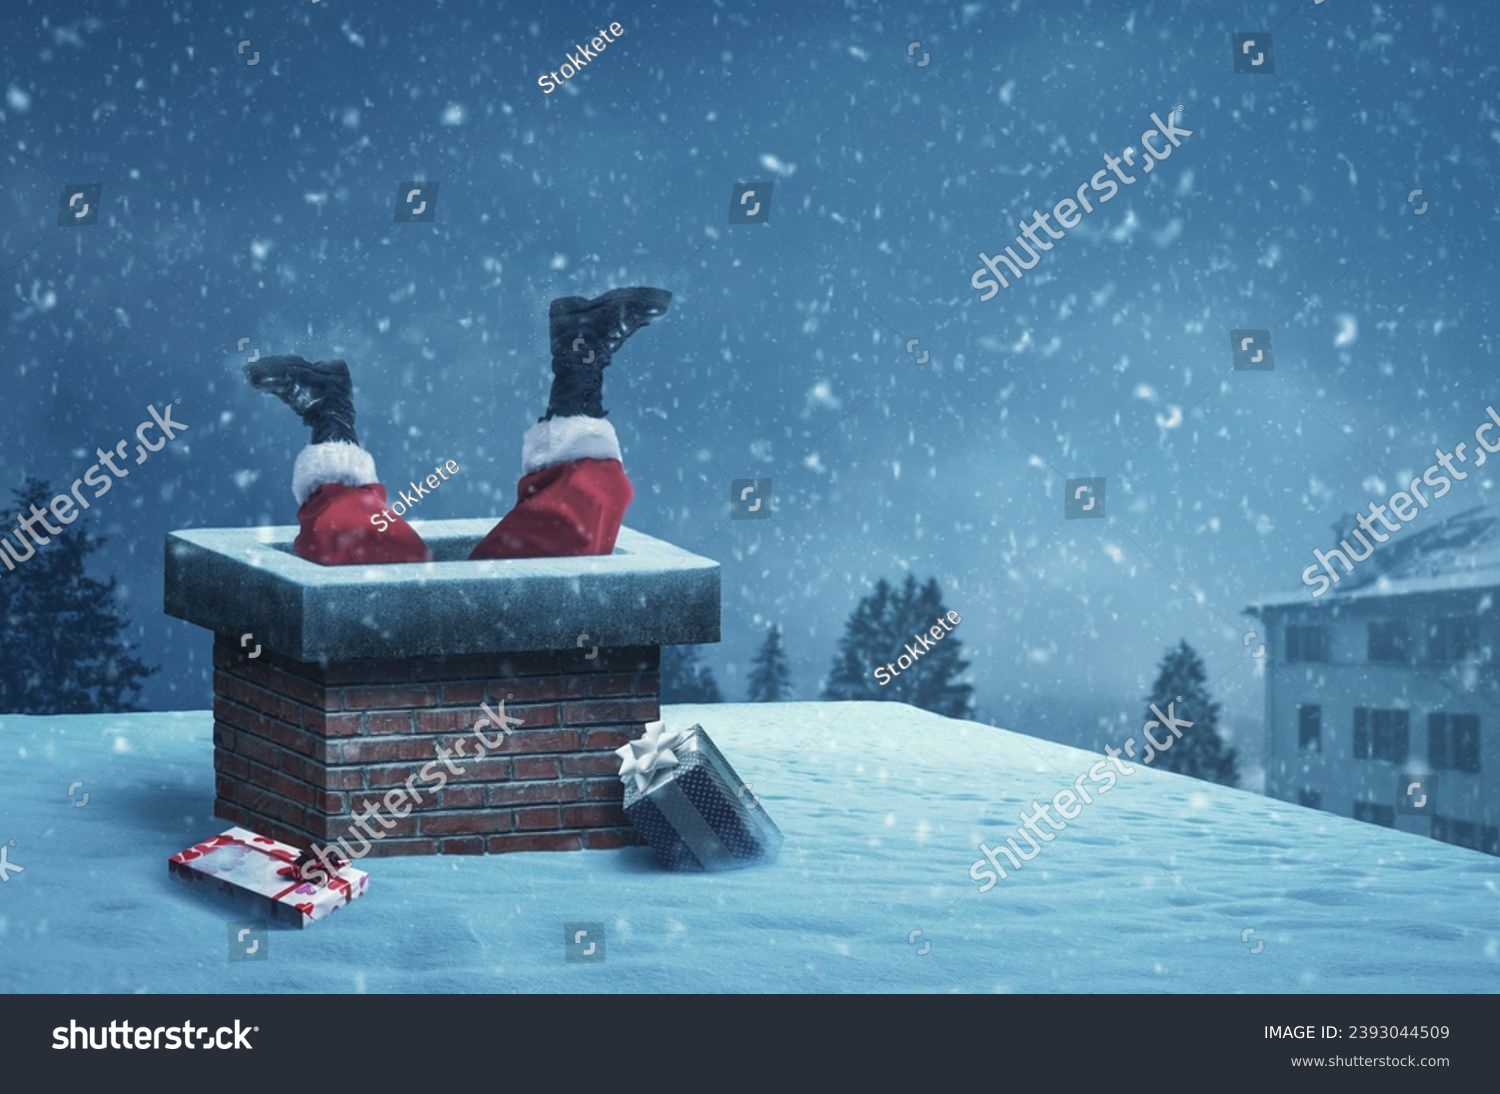 Funny Santa Claus stuck with feet up in a chimney on a roof, he is delivering gifts on Christmas Eve #2393044509